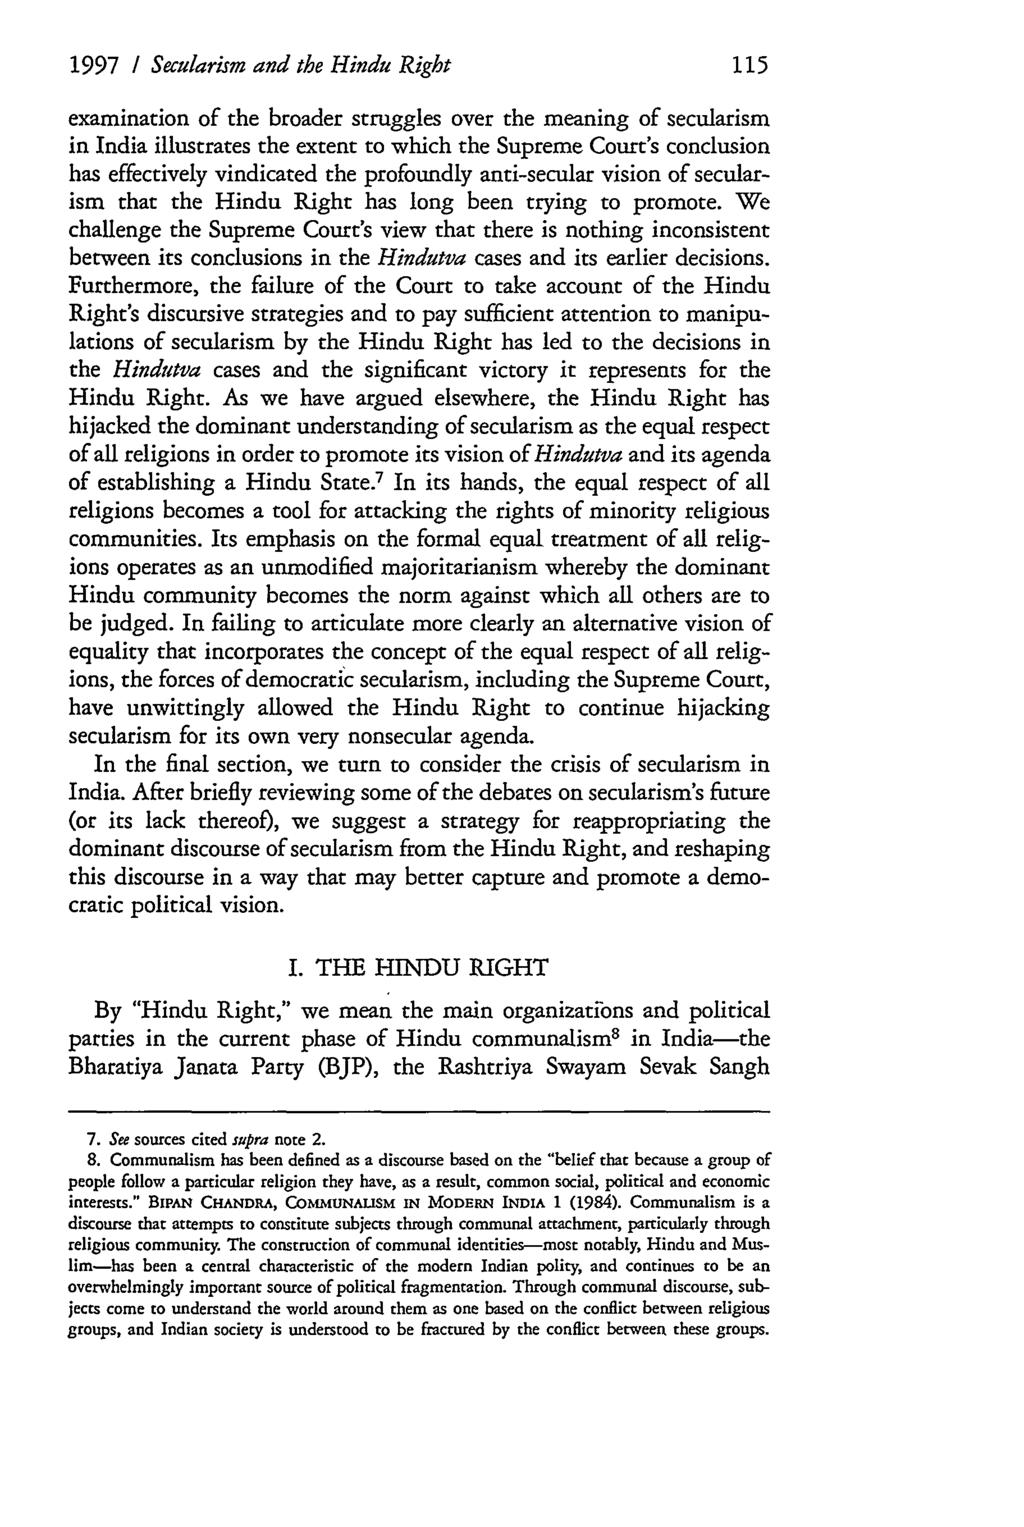 1997 / Secularism and the Hindu Right examination of the broader struggles over the meaning of secularism in India illustrates the extent to which the Supreme Court's conclusion has effectively